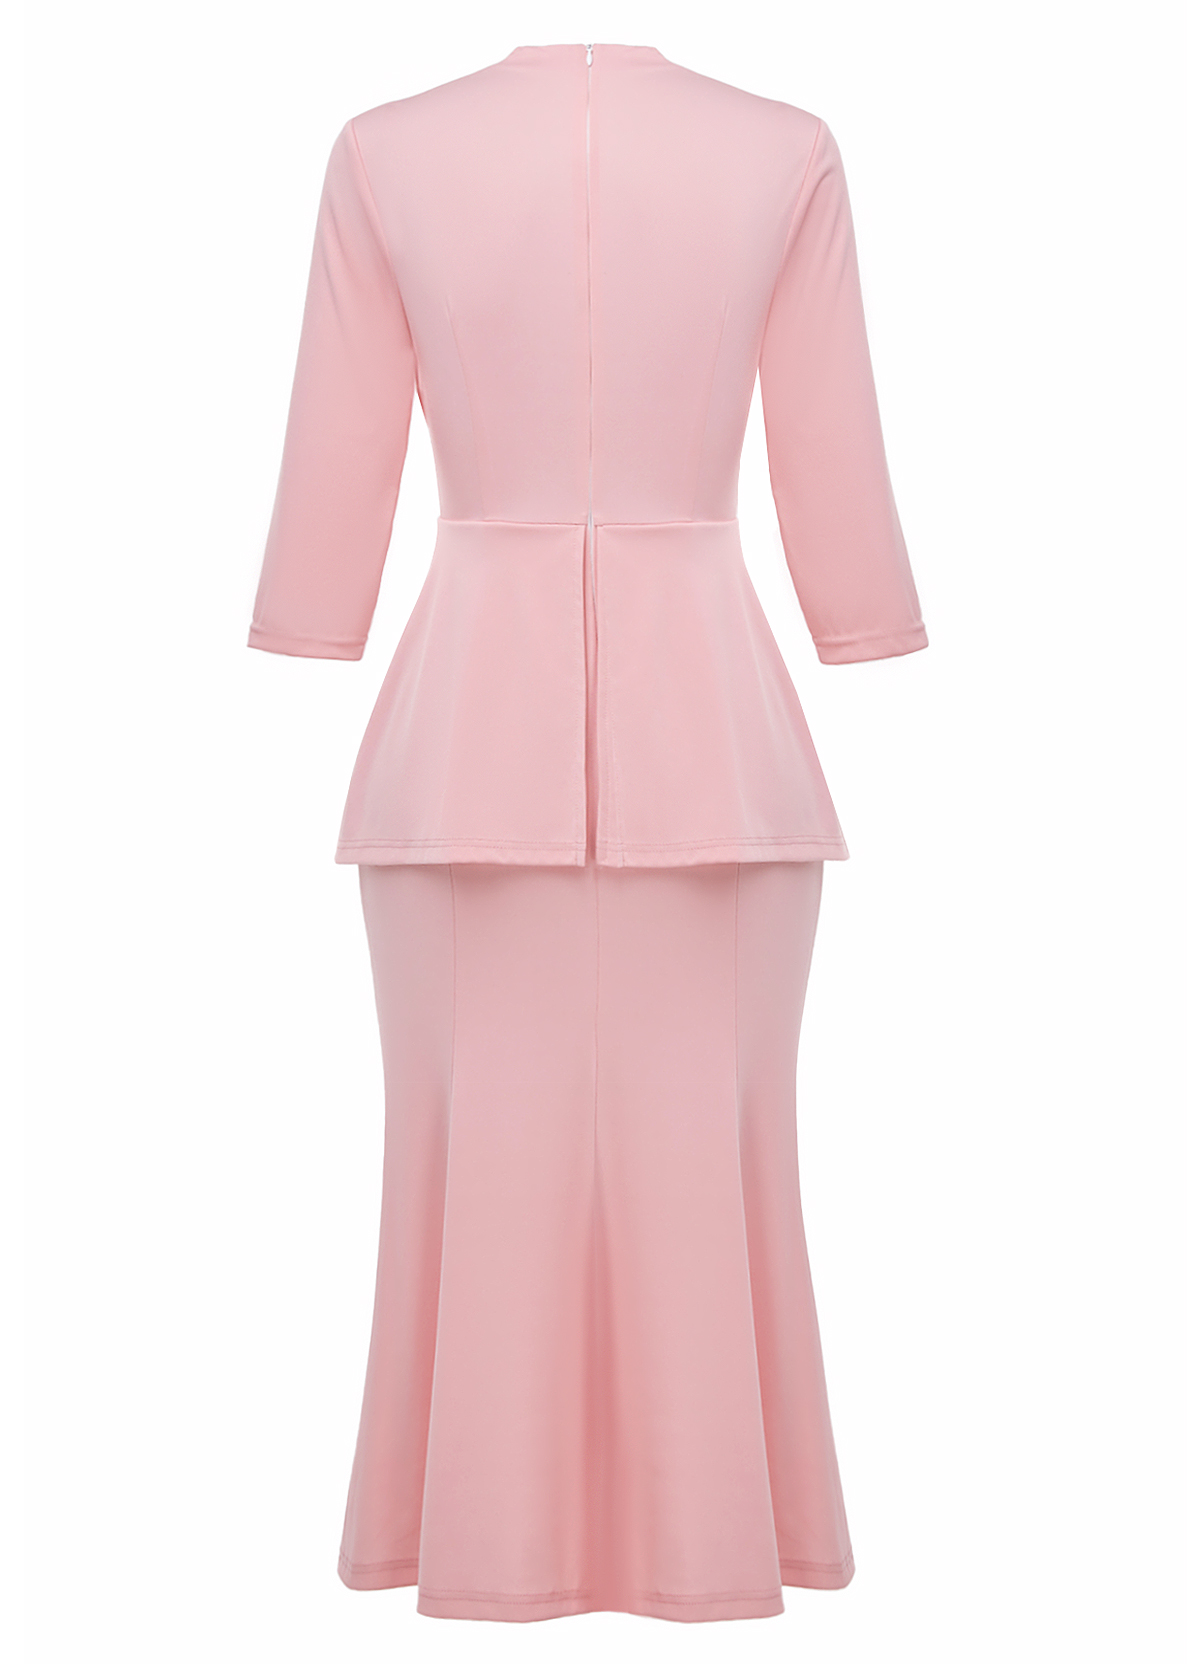 Fake 2in1 Pink 3/4 Sleeve Square Neck Bodycon Dress